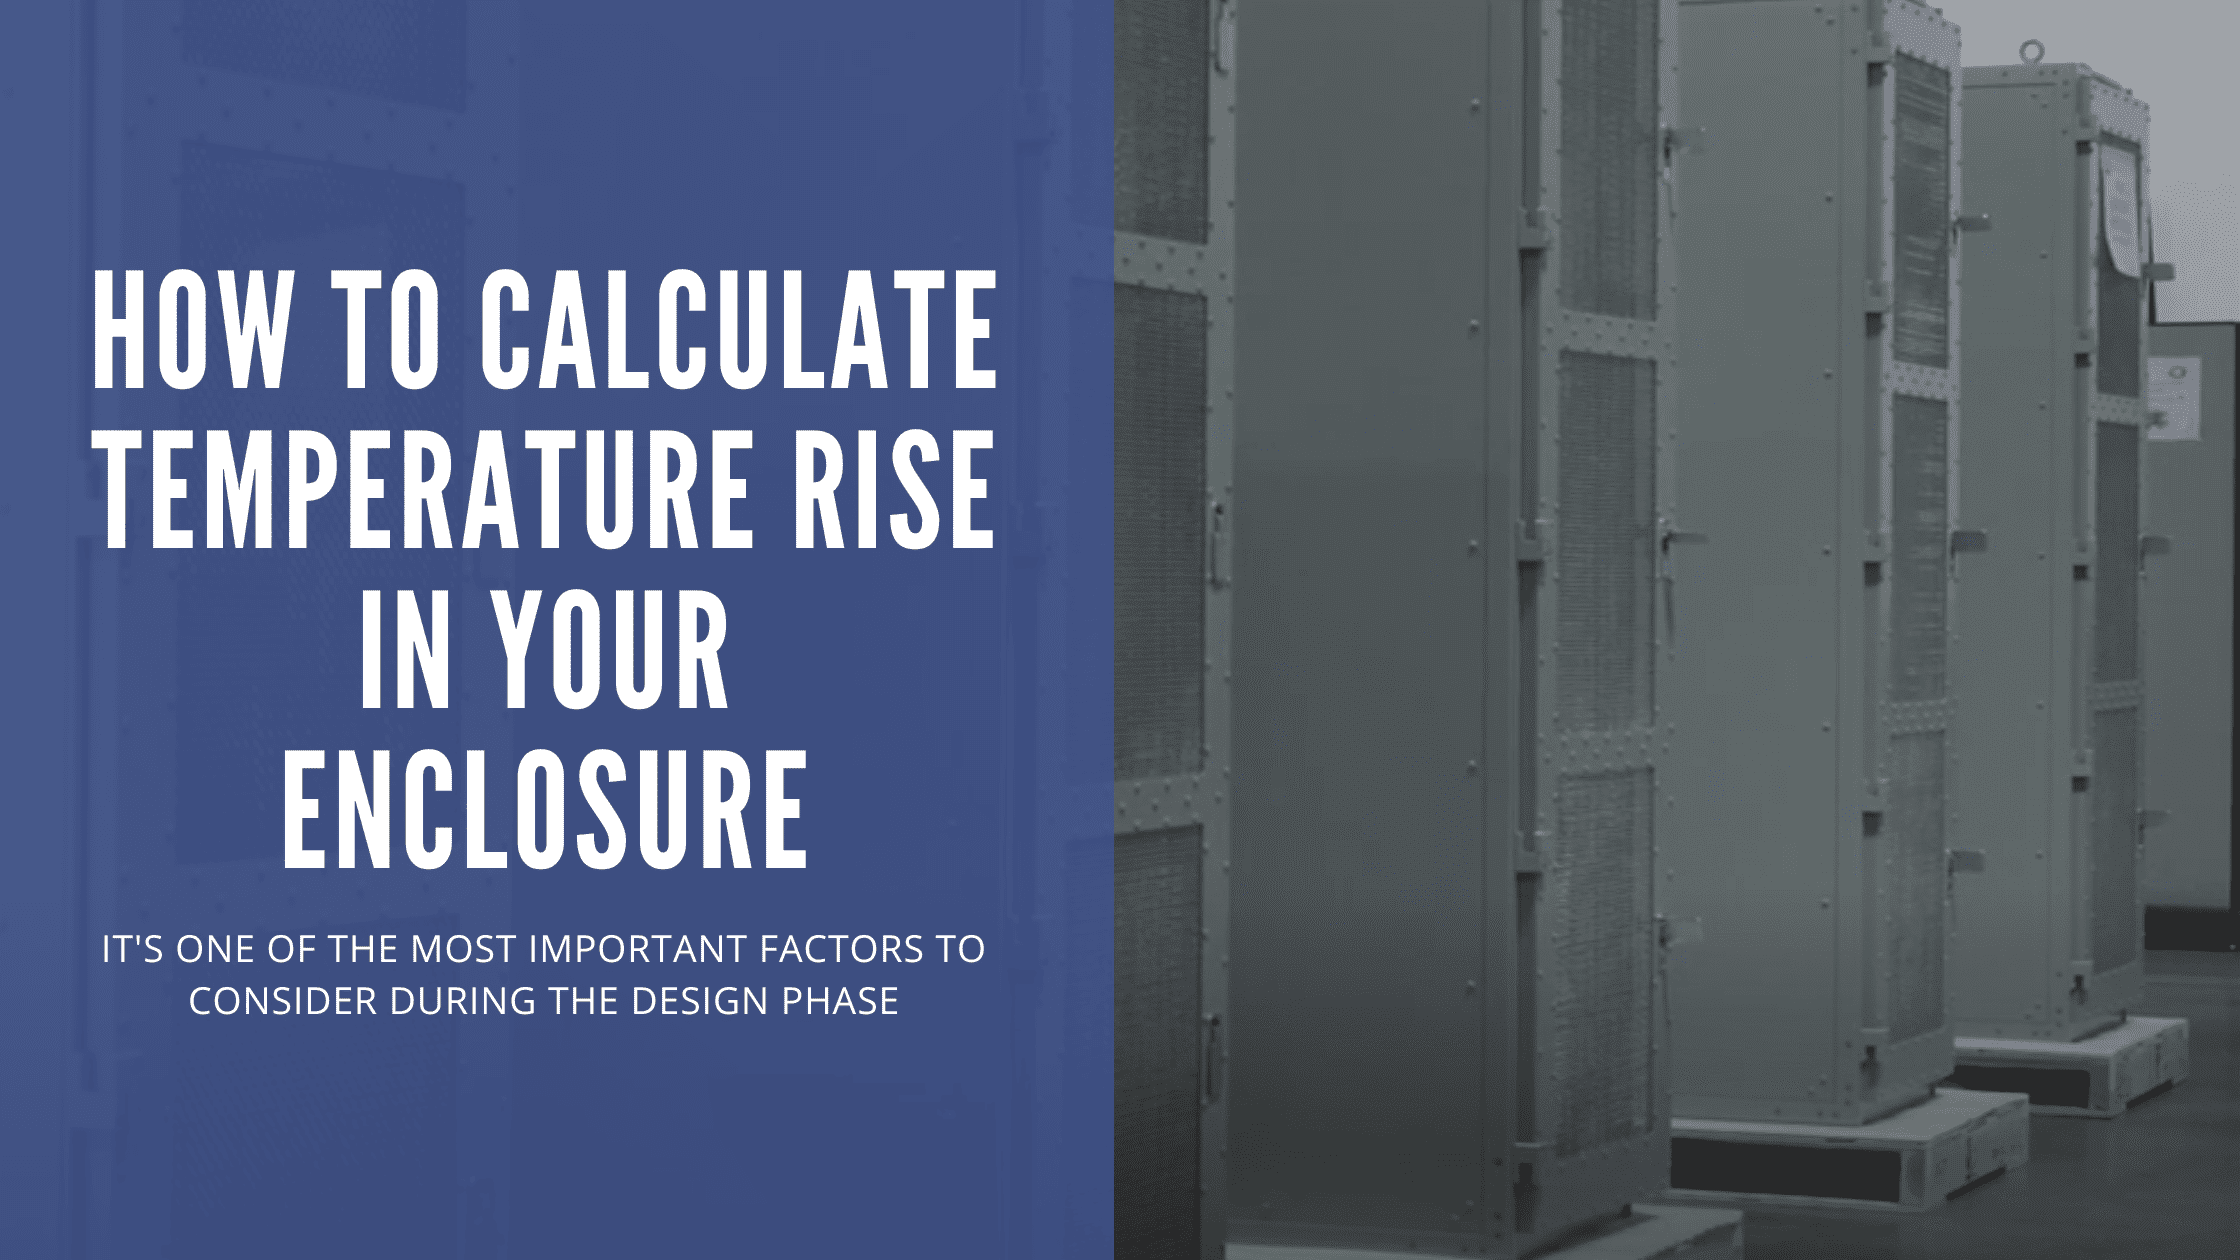 How to calculate temperature rise in your enclosure